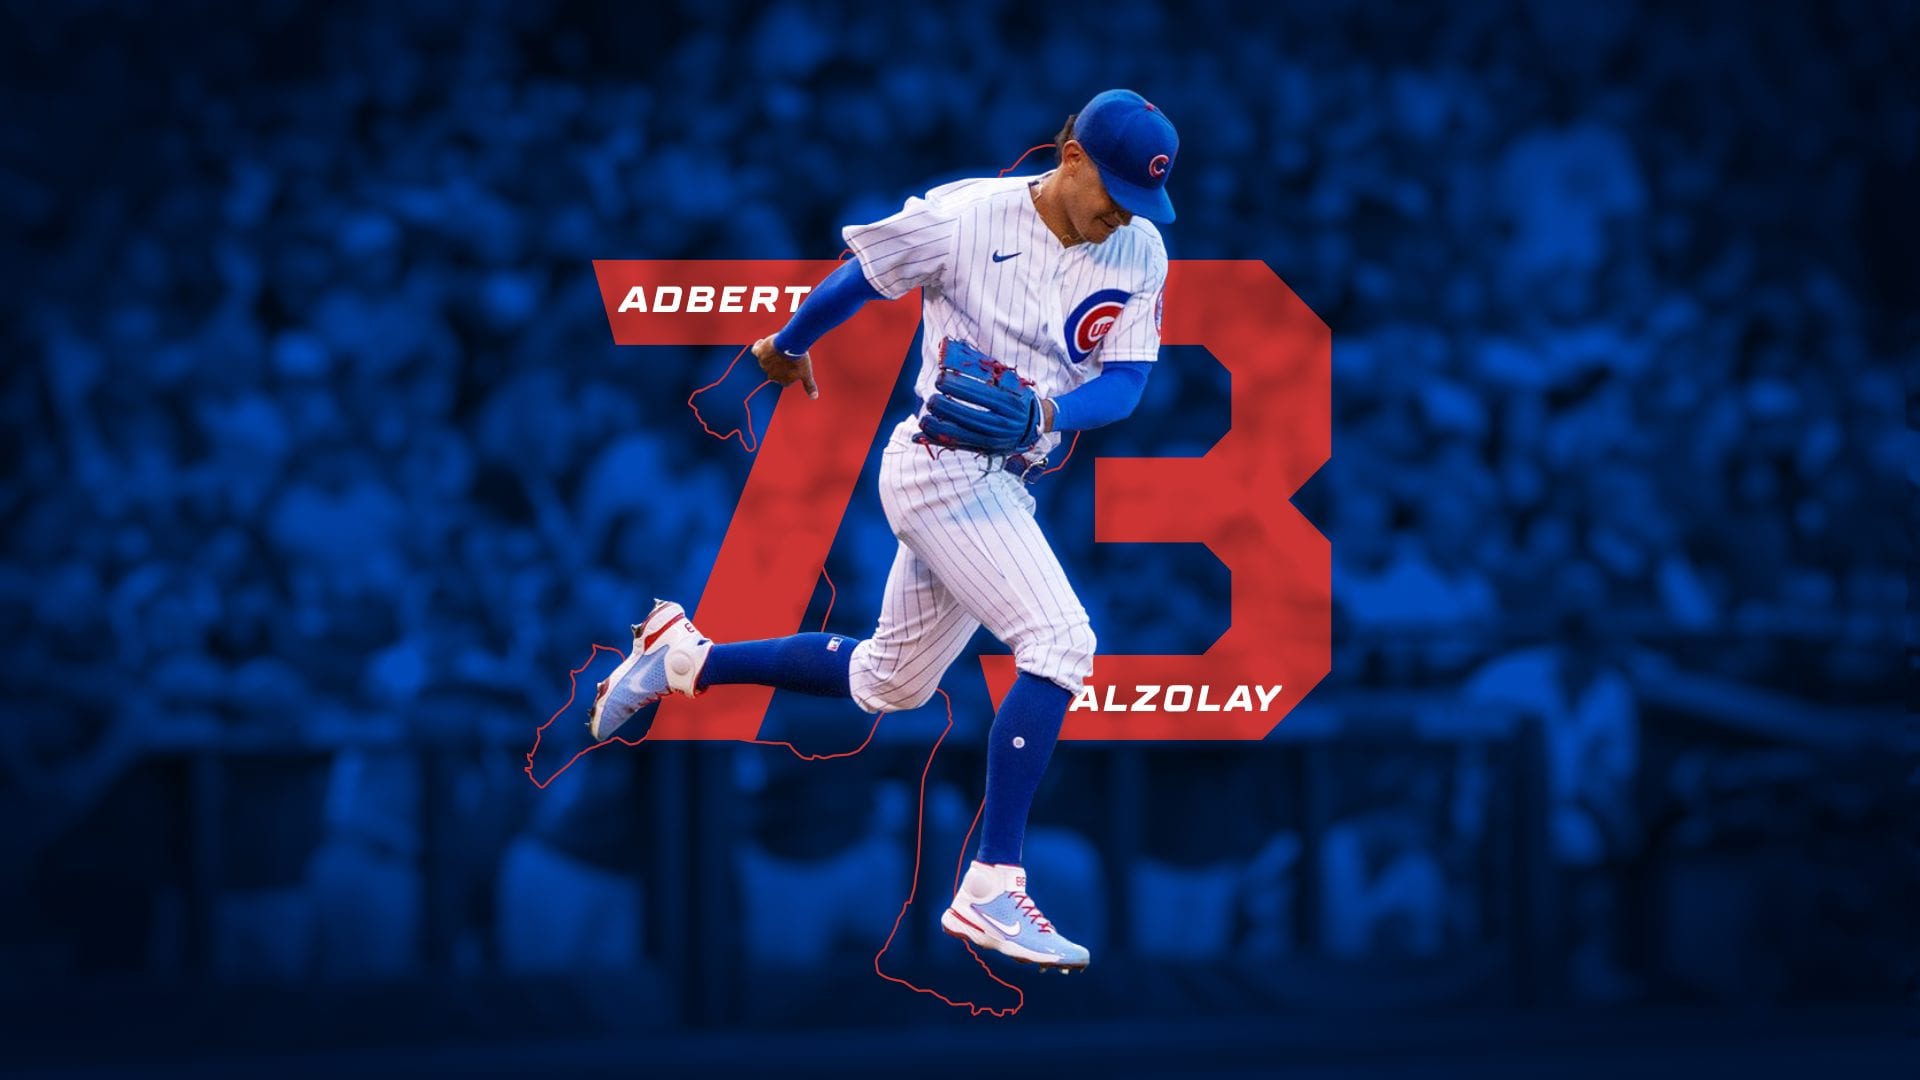 Adbert Alzolay Feature Image Graphic